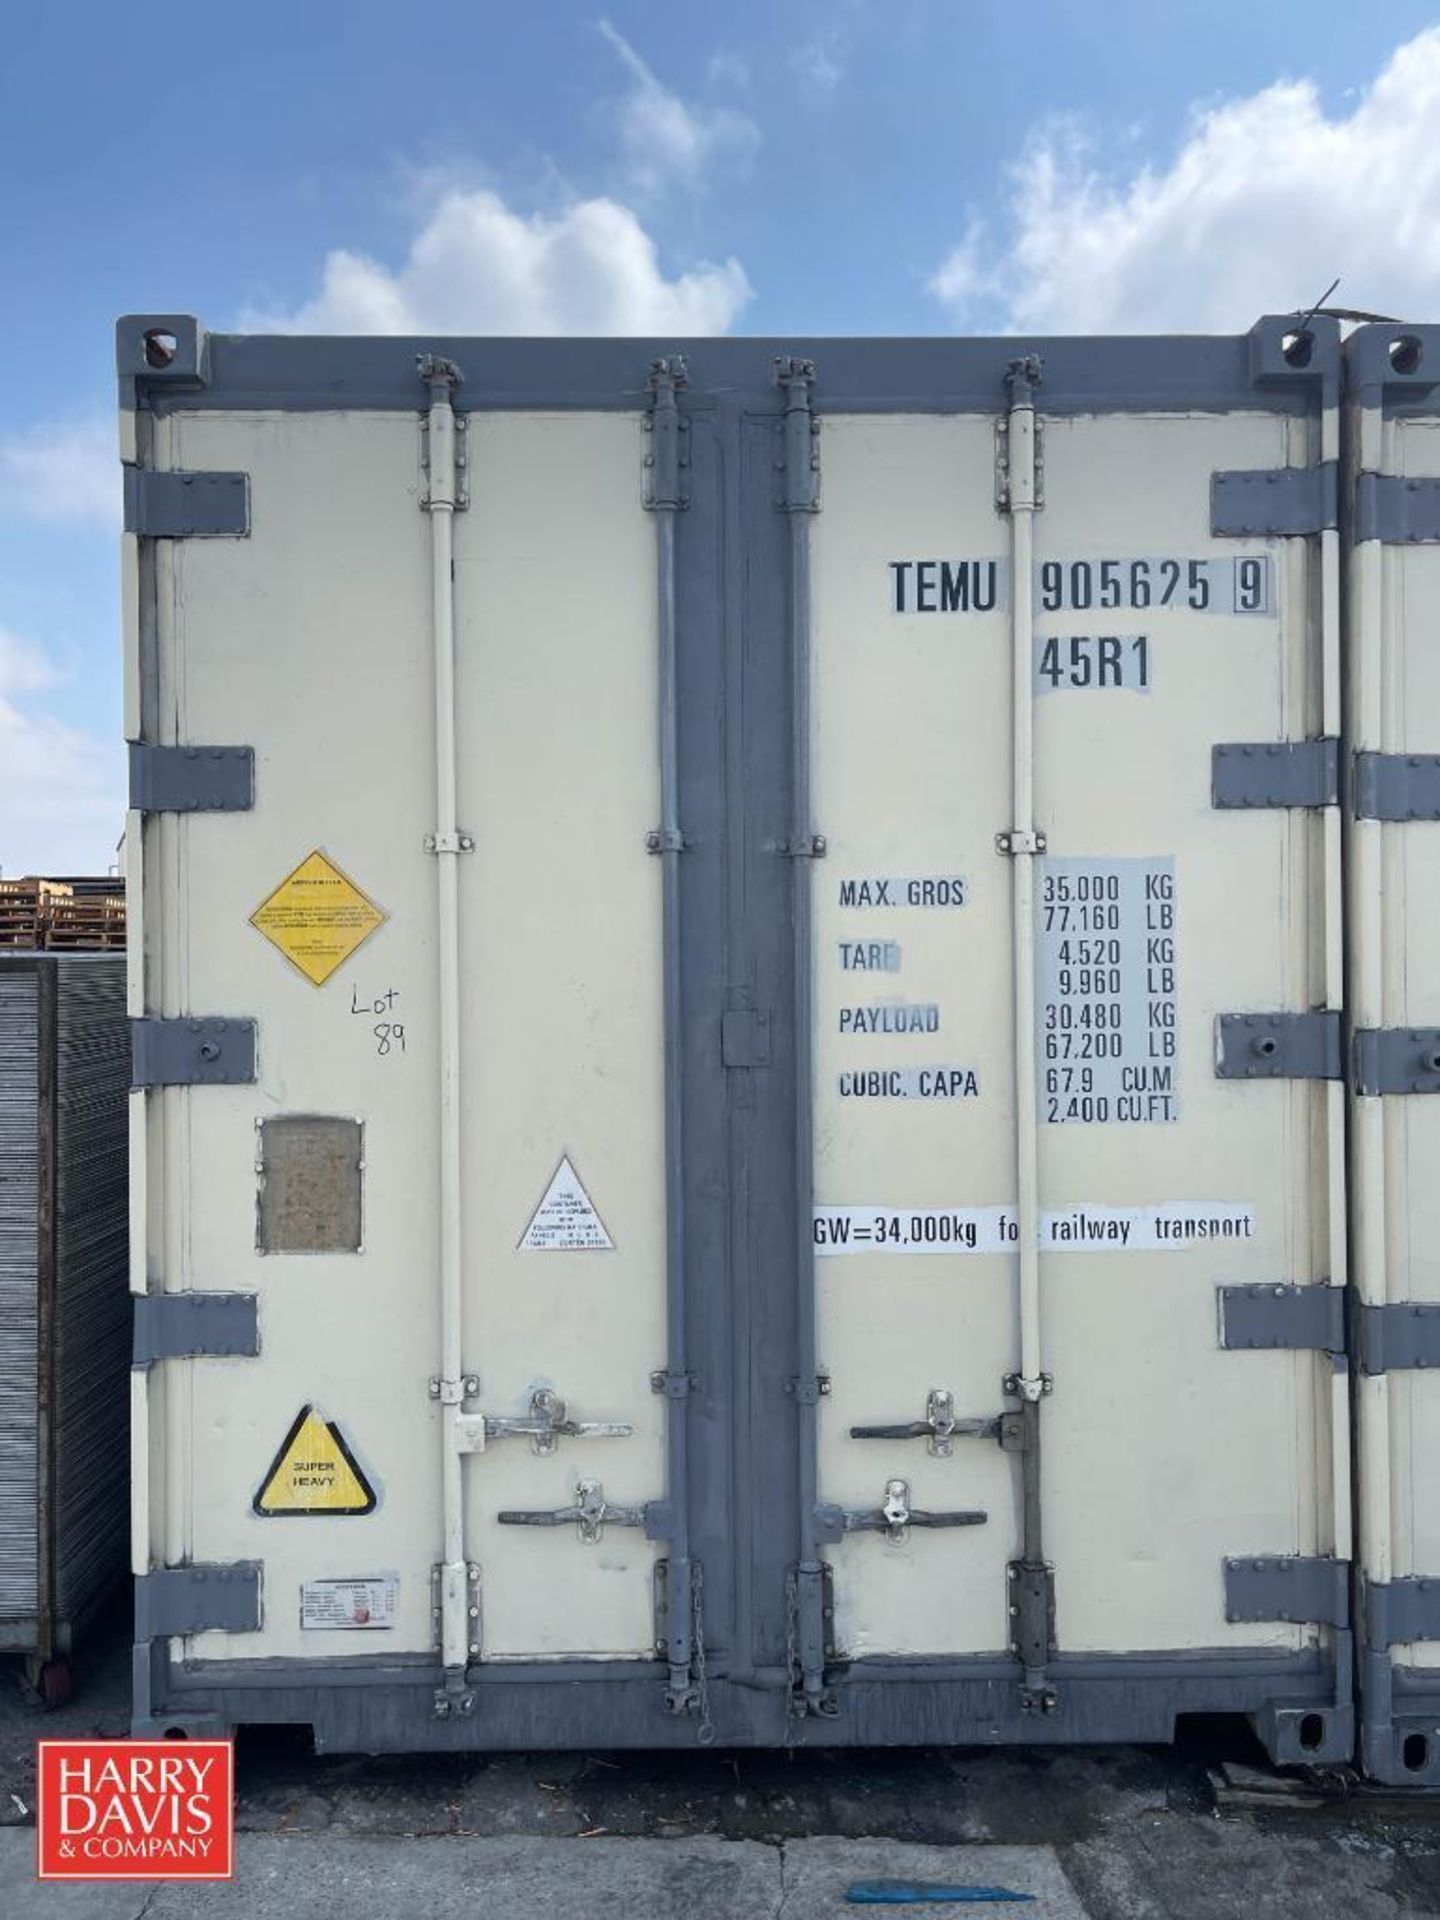 2011 Shanghai Reefer 40' Low Temp Shipping Container, Model: SS4WH2-B, S/N: SR599665 - Image 2 of 3